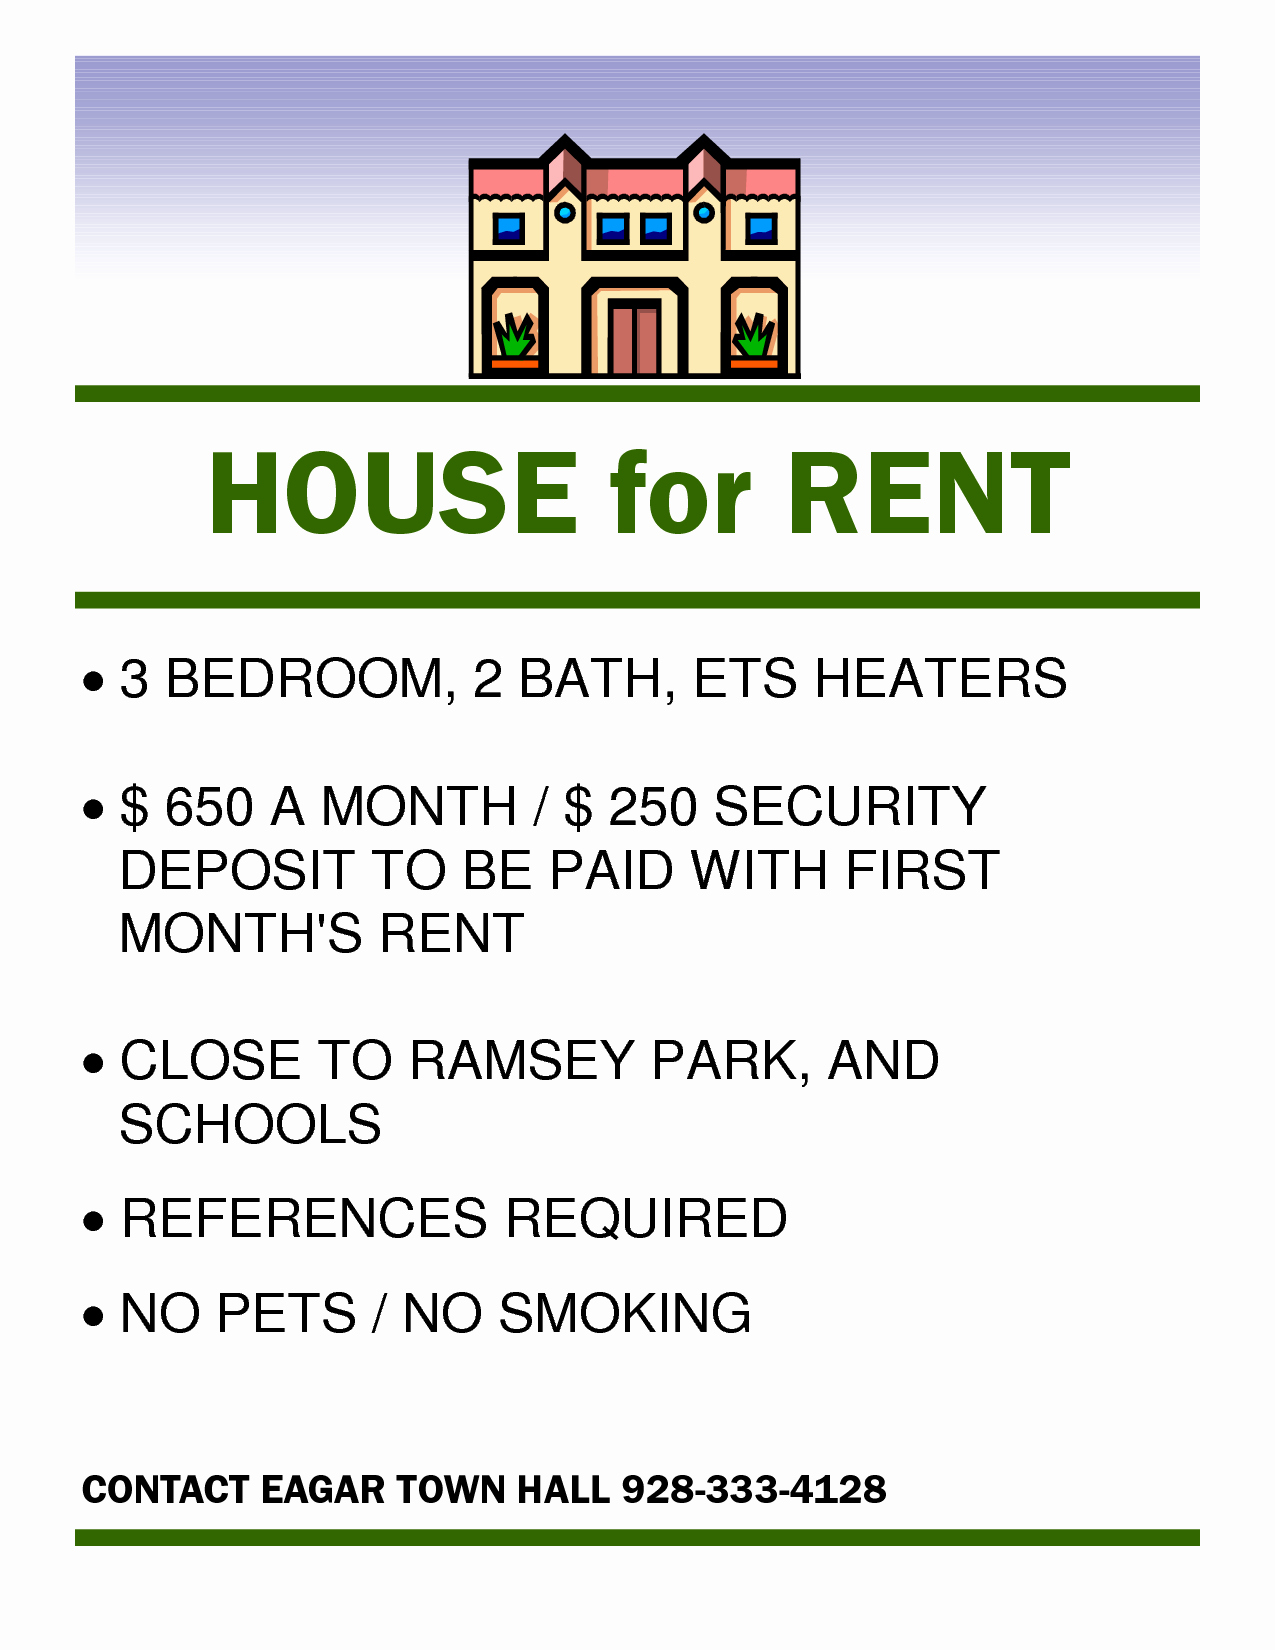 For Rent Flyer Template Free Awesome 9 Home for Rent Flyer Free Psd Free Real Estate